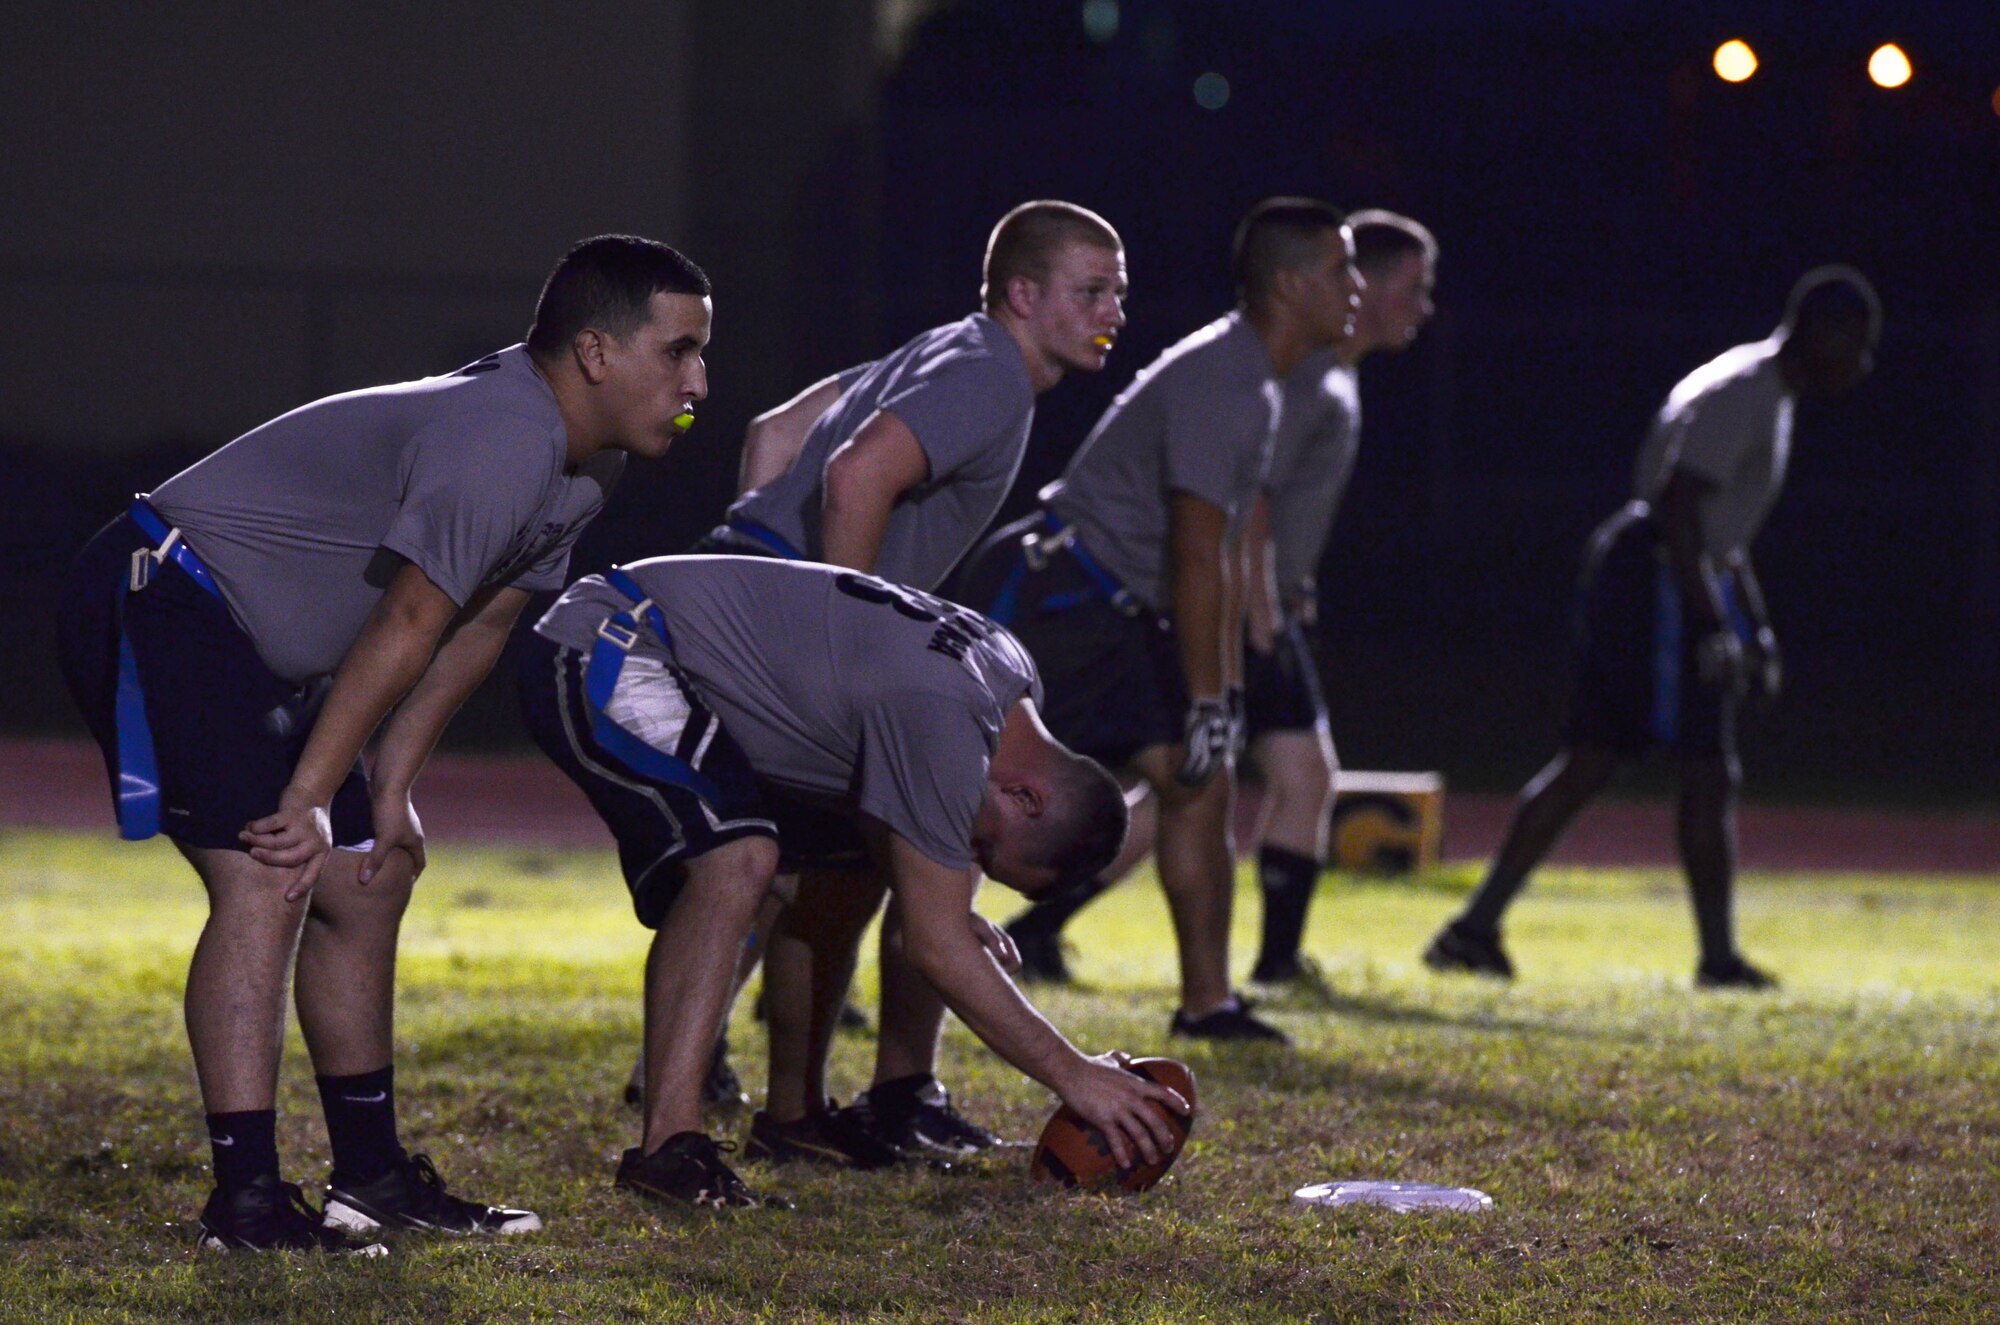 A player from the 36th Logistics Readiness Squadron prepares to hike the football during an intramural football game between 36th LRS and 36th Force Support Squadron on Andersen Air Force Base, Guam, Dec. 19, 2013. 36th FSS was defeated by 36th LRS 21-0. (U.S. Air Force photo by Airman 1st Class Mariah Haddenham/Released)